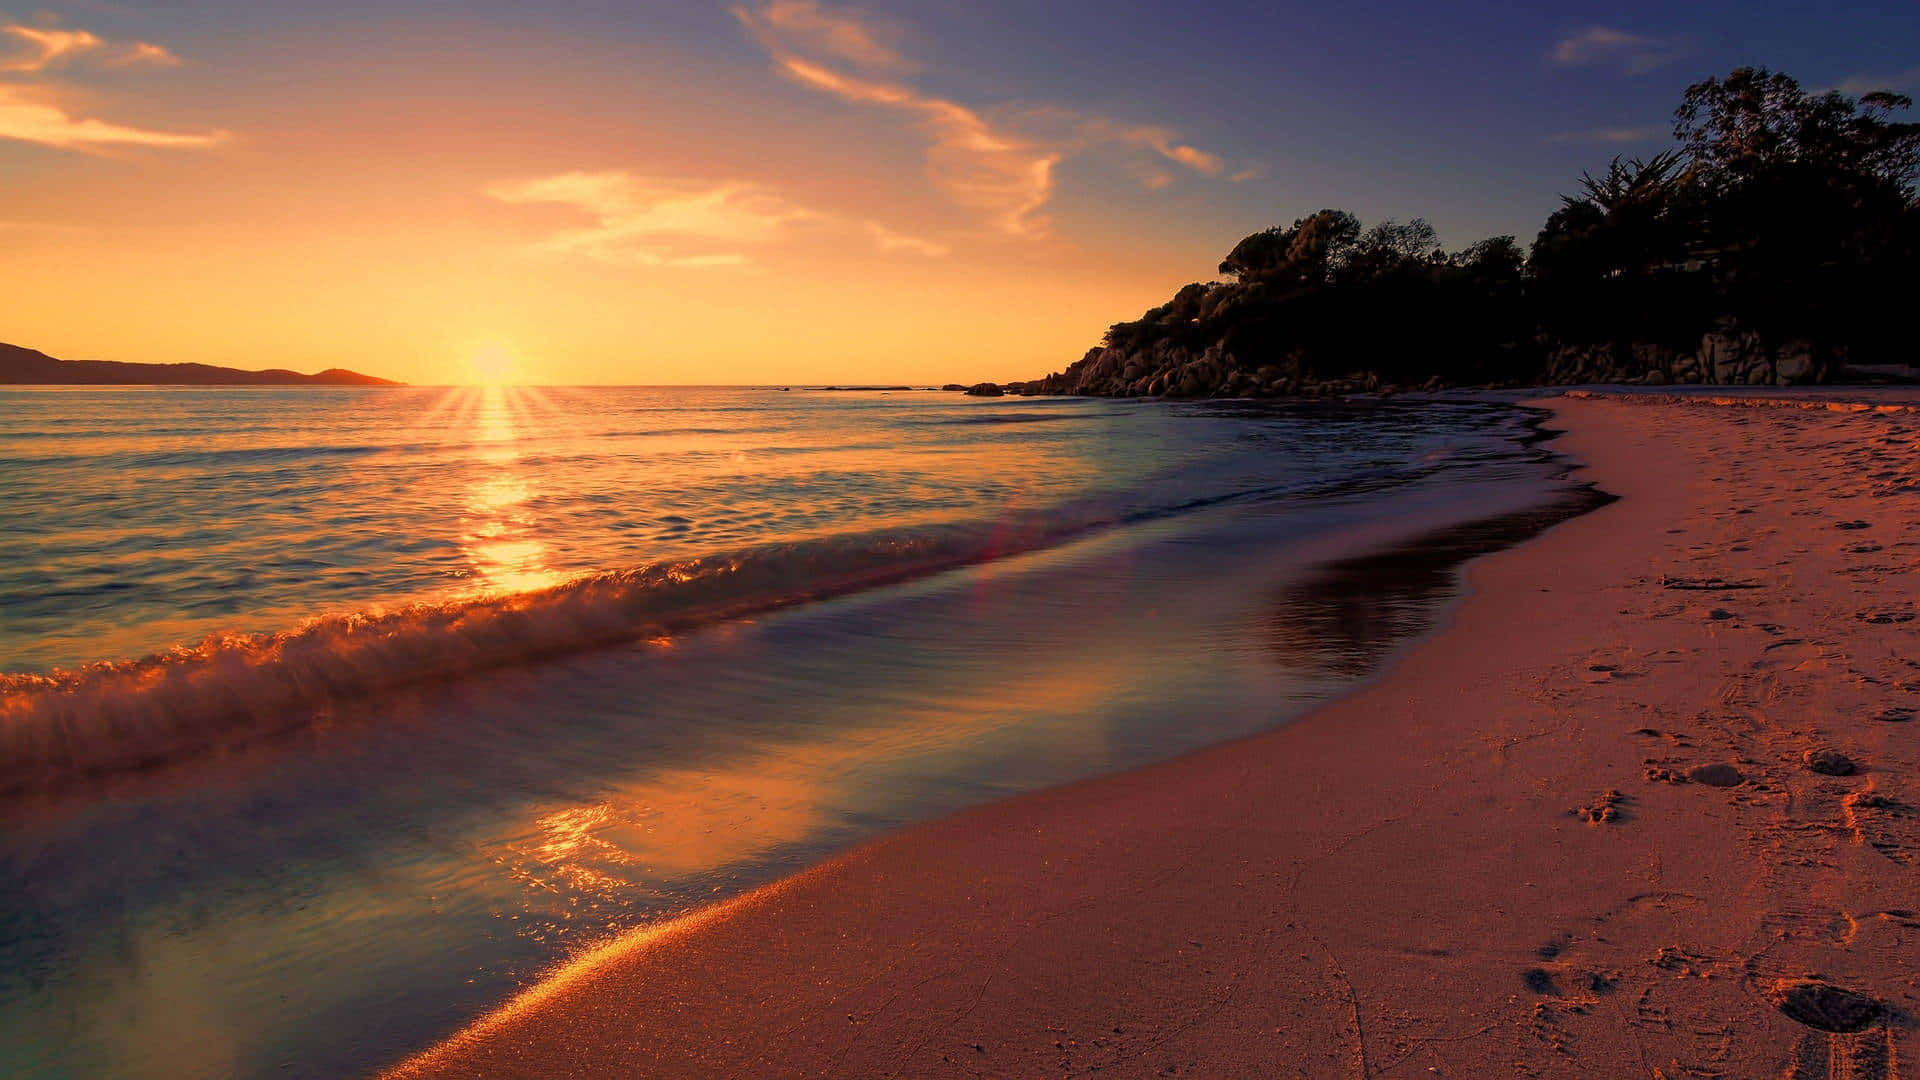 Relax and soak in the beauty of the beach sunset.